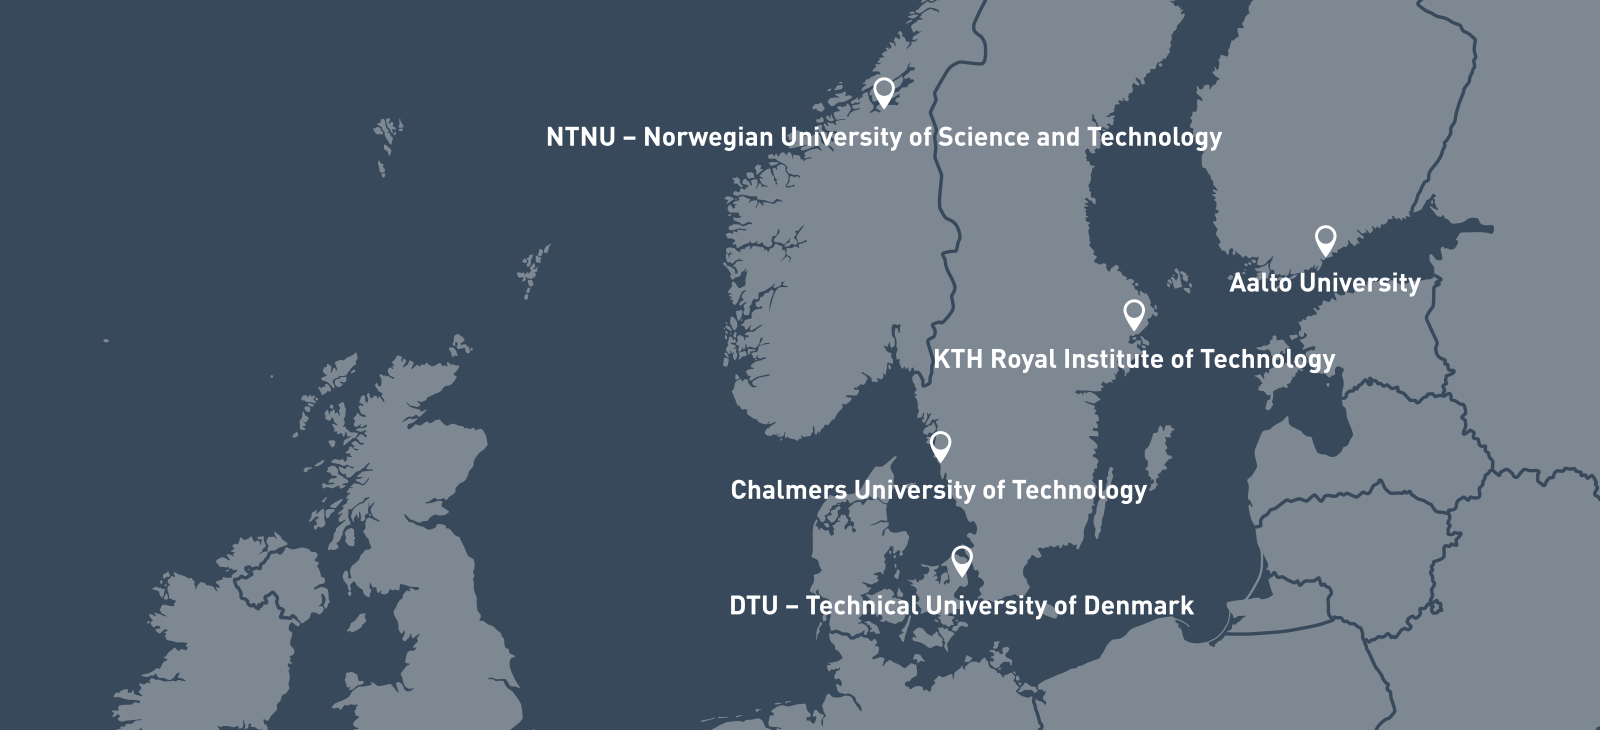 Nordic Five tech - Alliance of the leading Nordic Technical Universities 